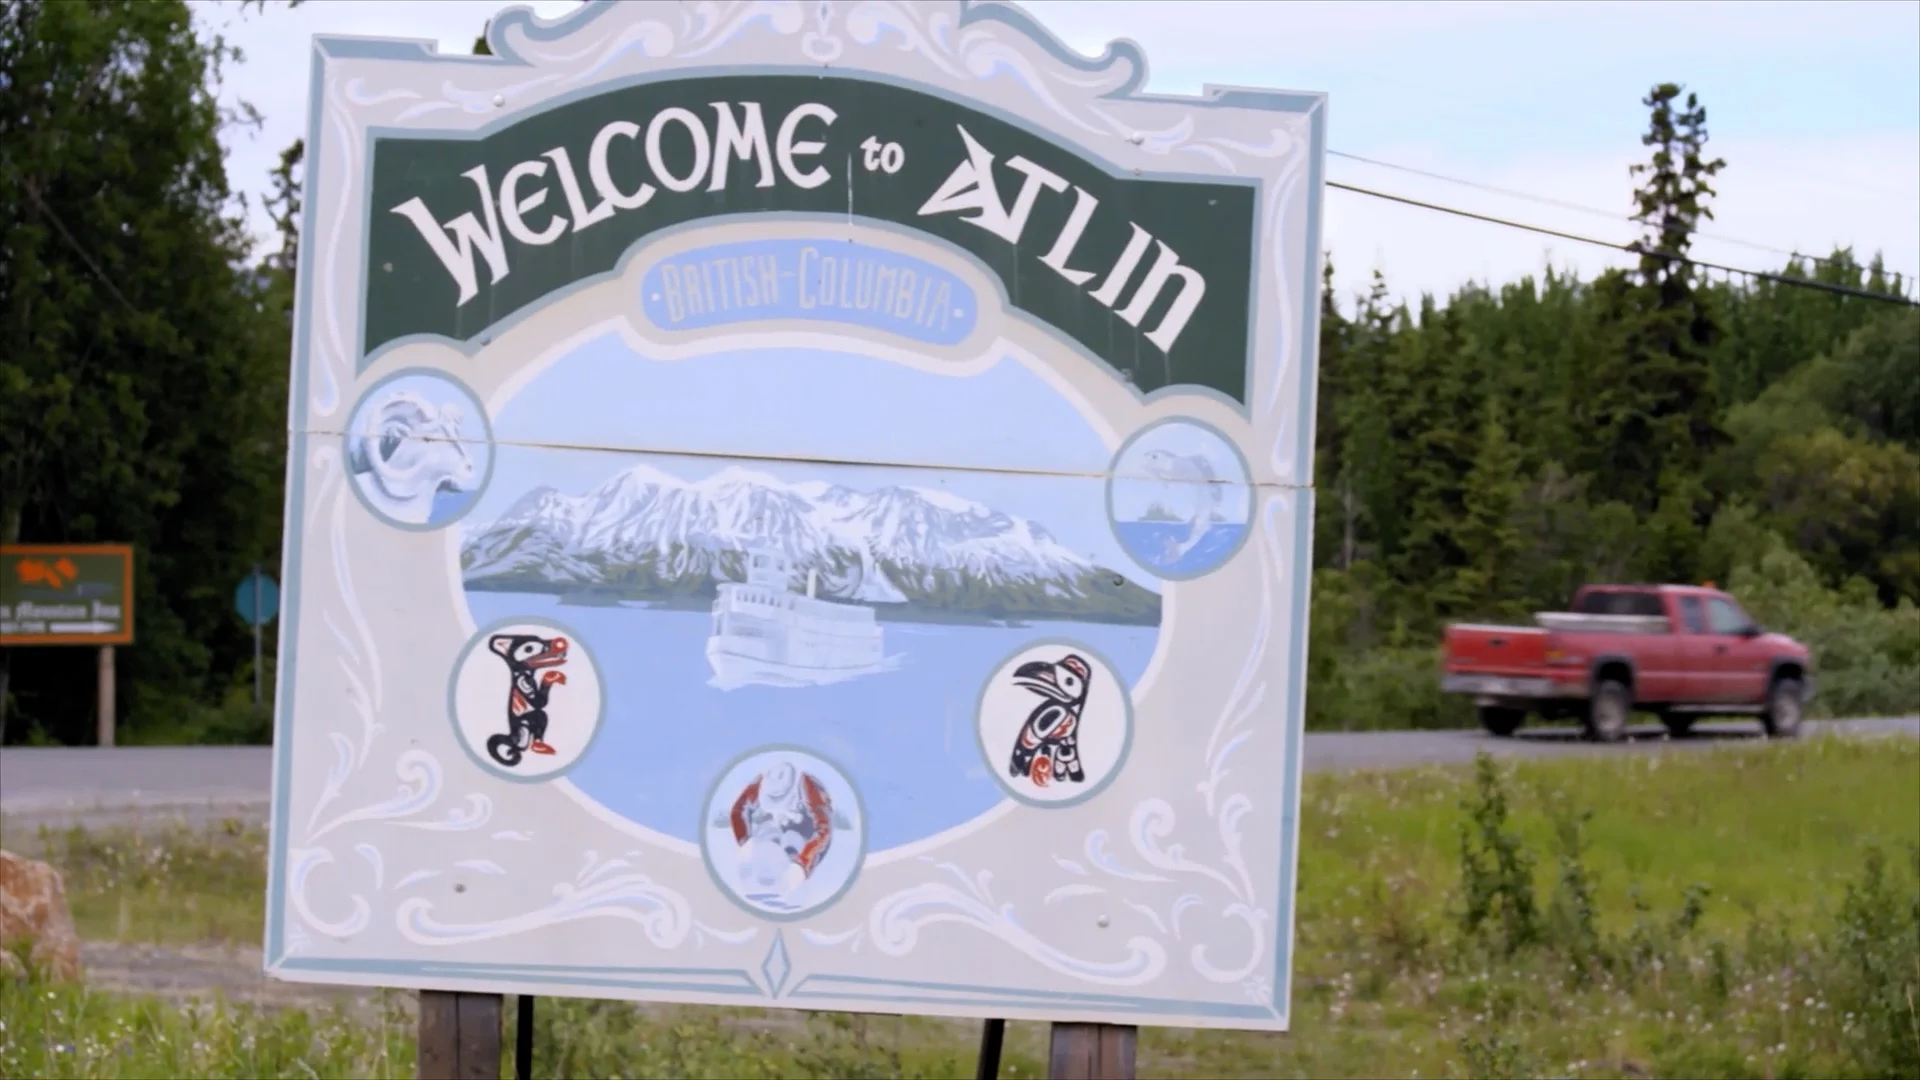 A welcome sign for Atlin, a town located in northern B.C. (Power to the People)